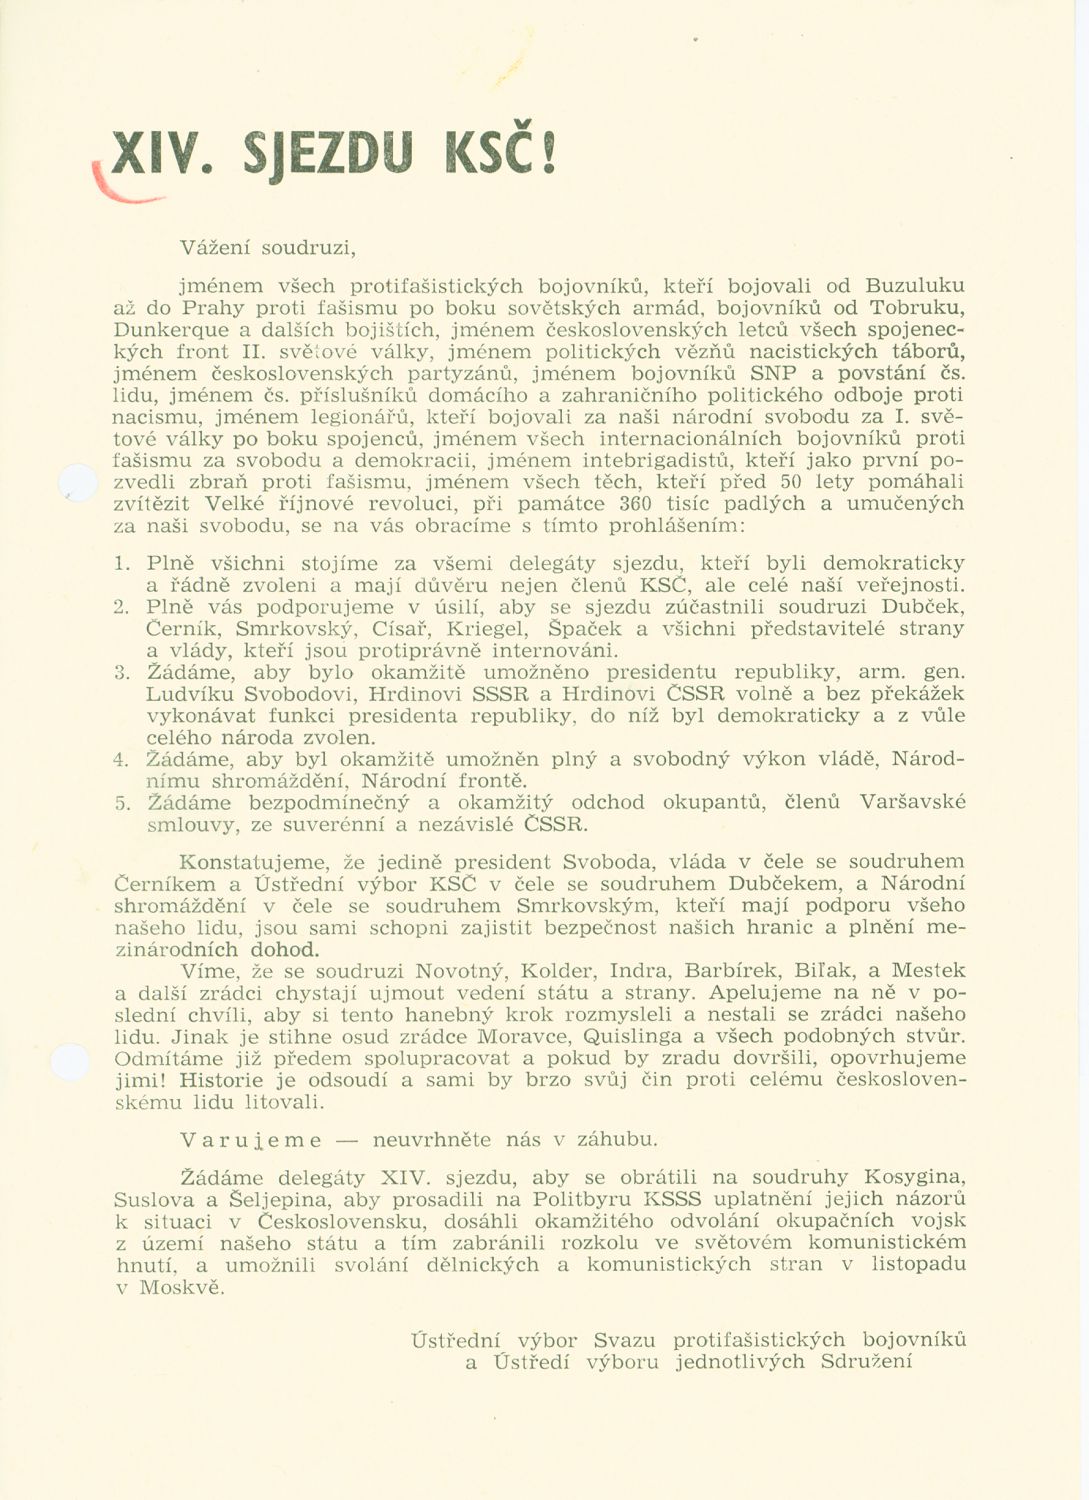 Appeal of the Anti-Fascist Associations to the Delegates of the XIVth Congress of the Czechoslovak Communist Party